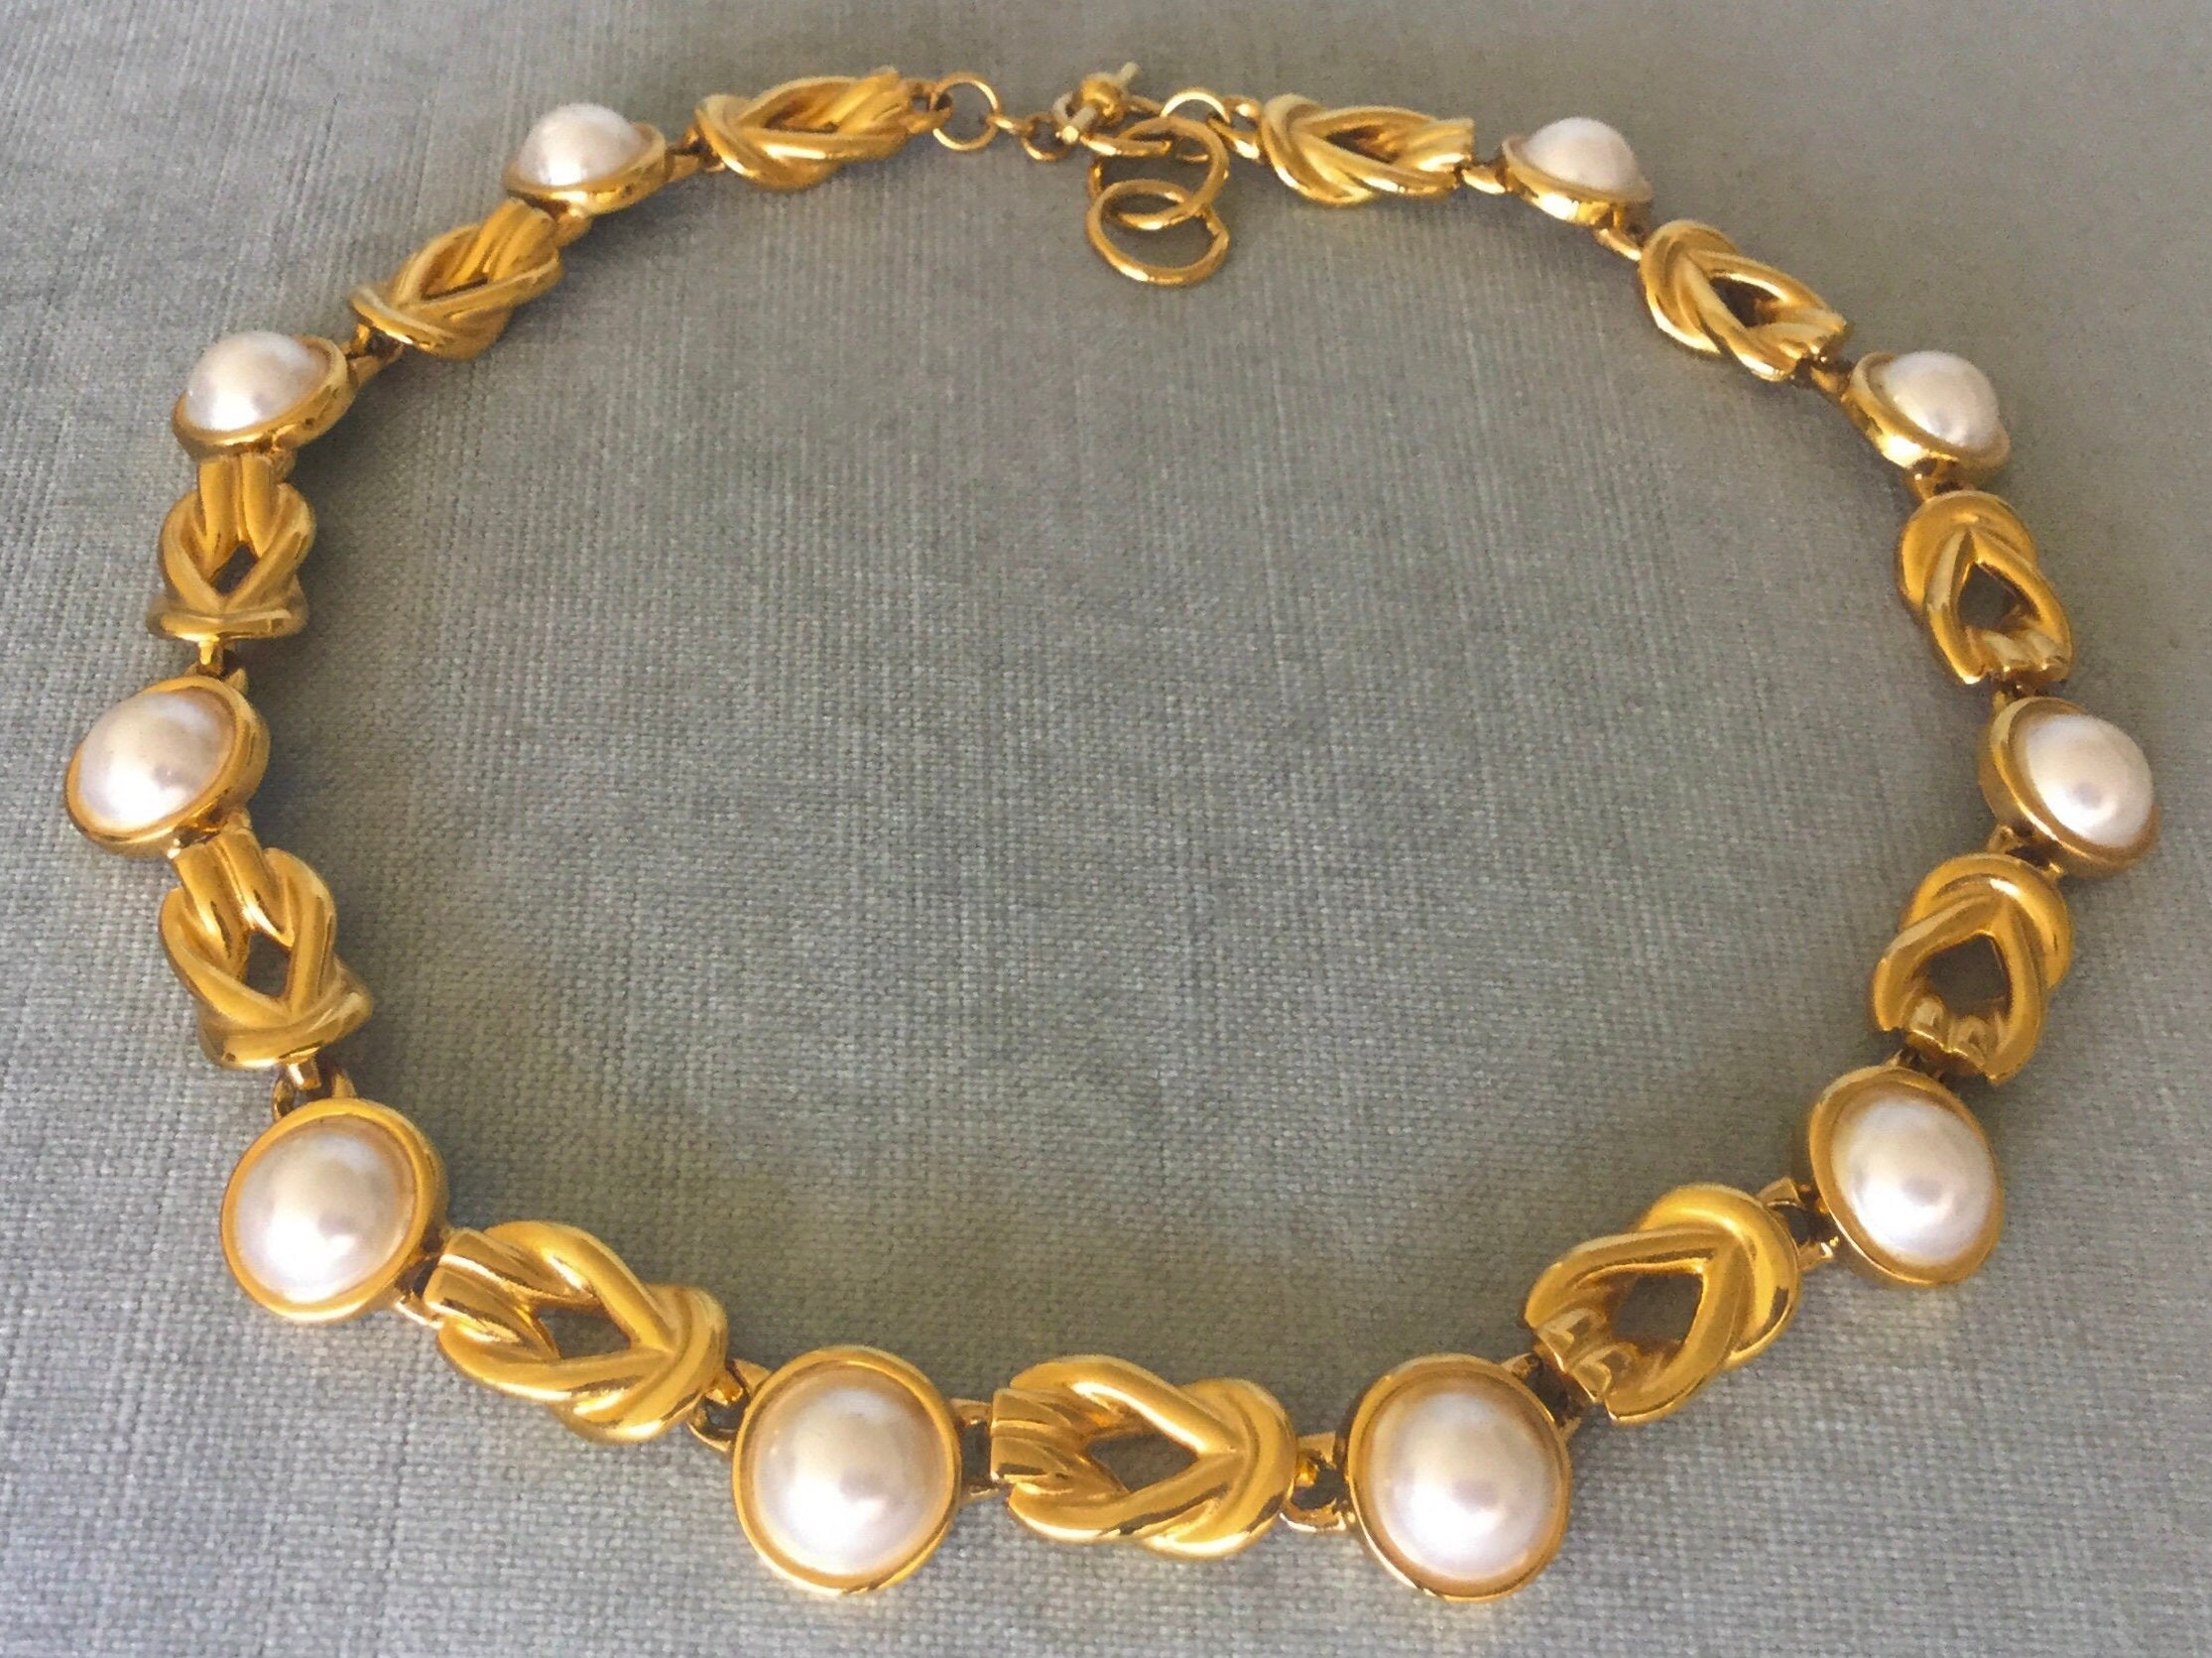 Christian Dior Faux Pearl Infinite Bracelet - Gold-Plated Link